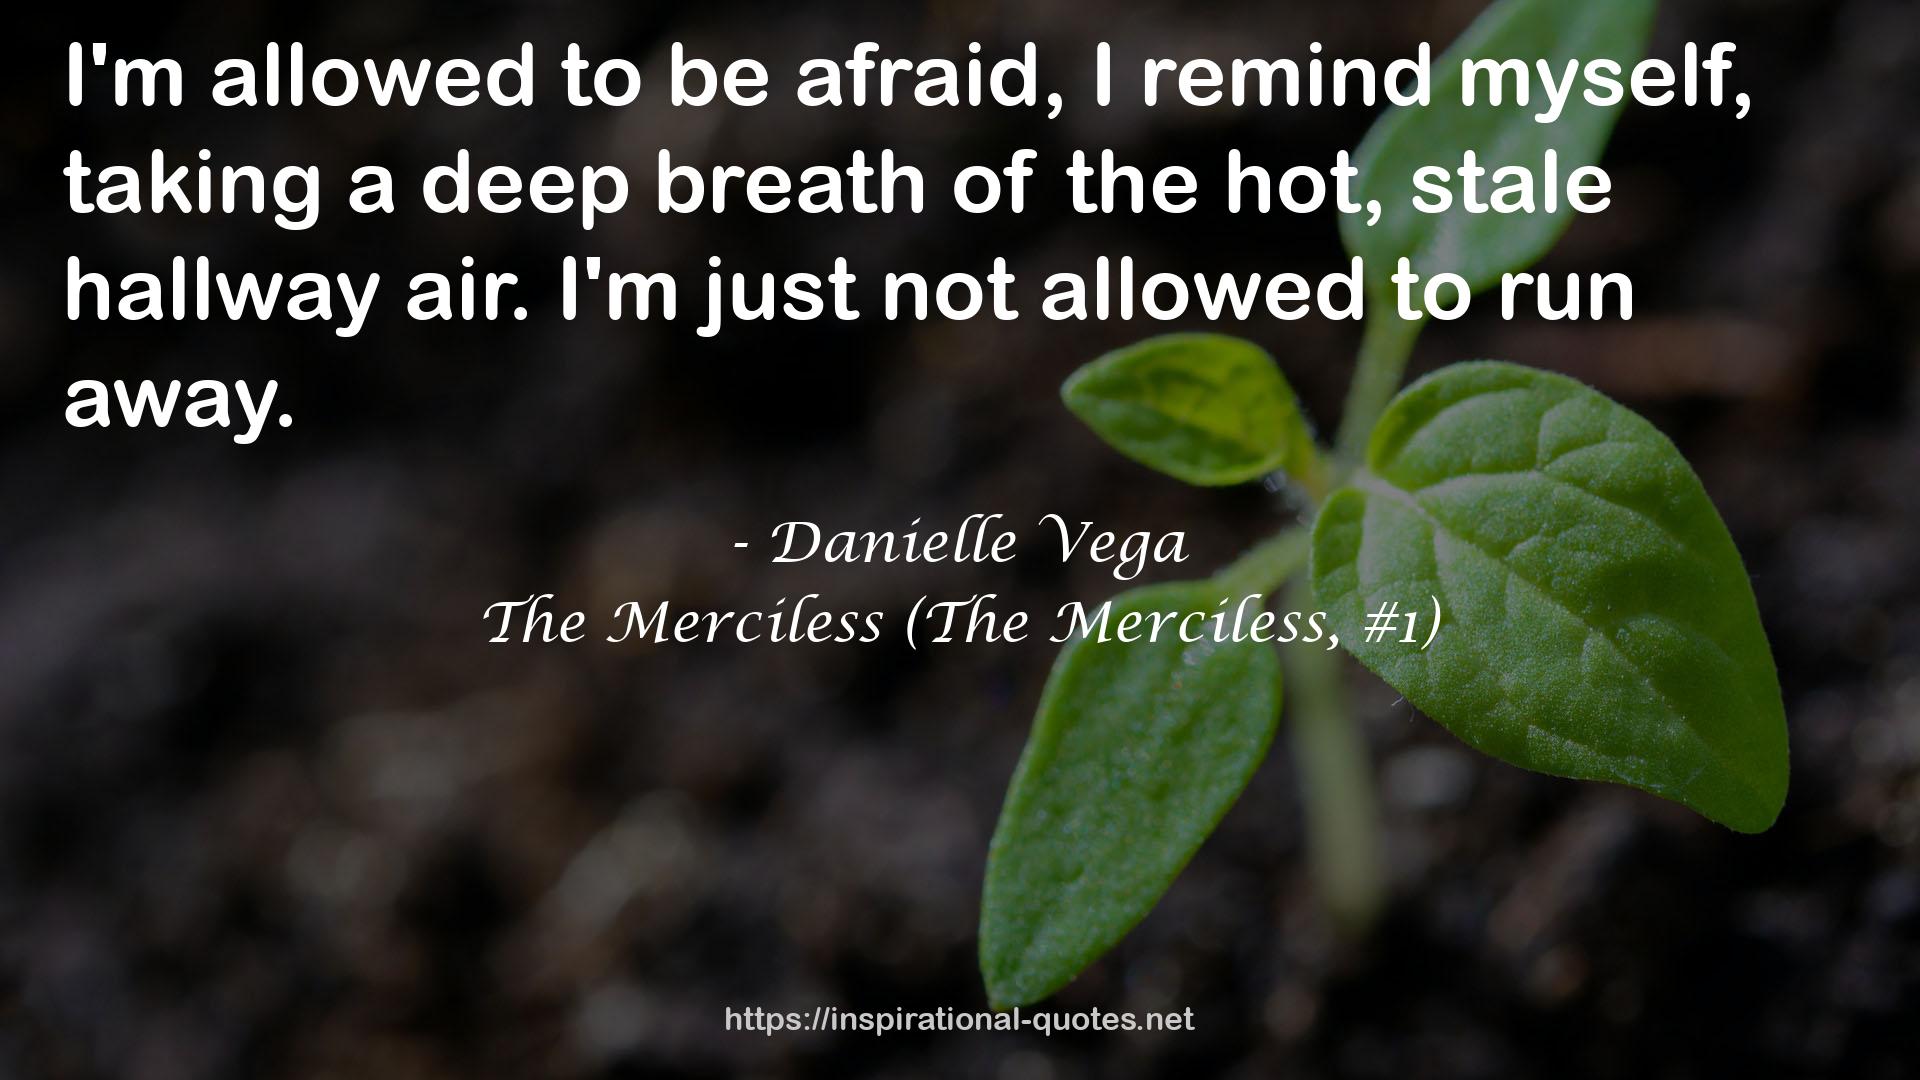 The Merciless (The Merciless, #1) QUOTES